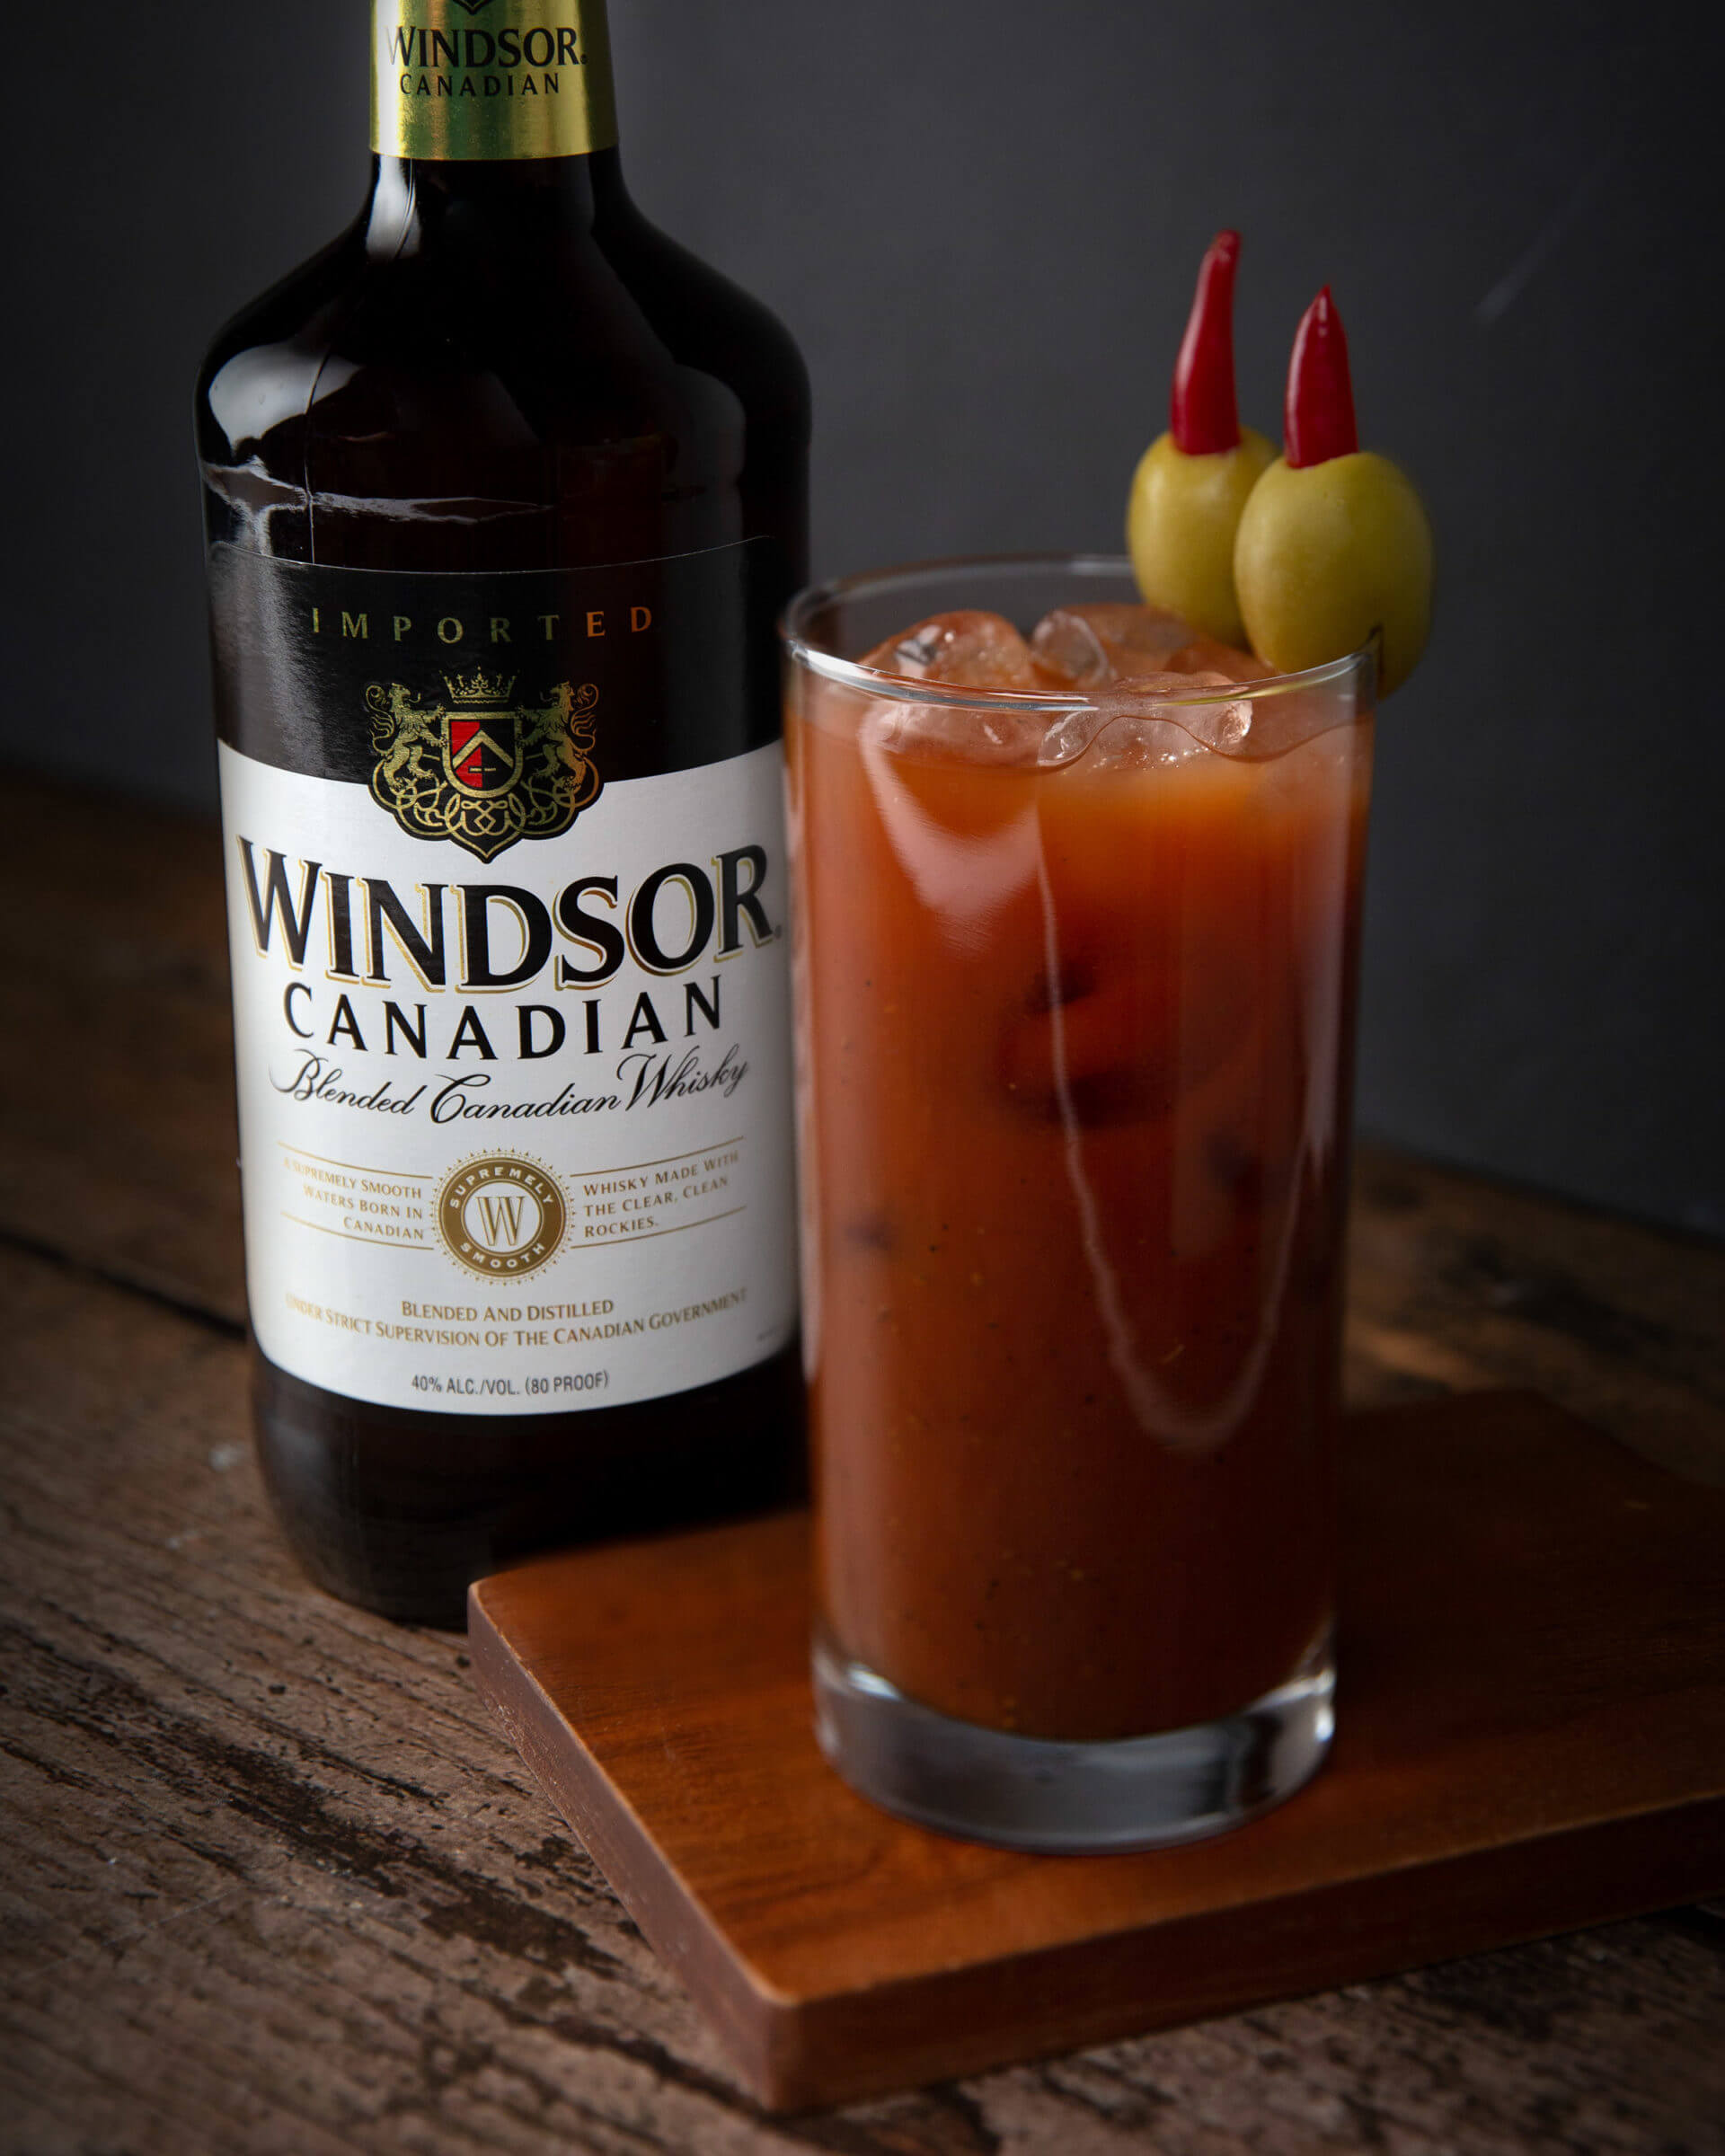 Windsor Canadian Blended Canadian Whisky 1L Bottle and Drink in Highball glass garnished with two olives with peppers.